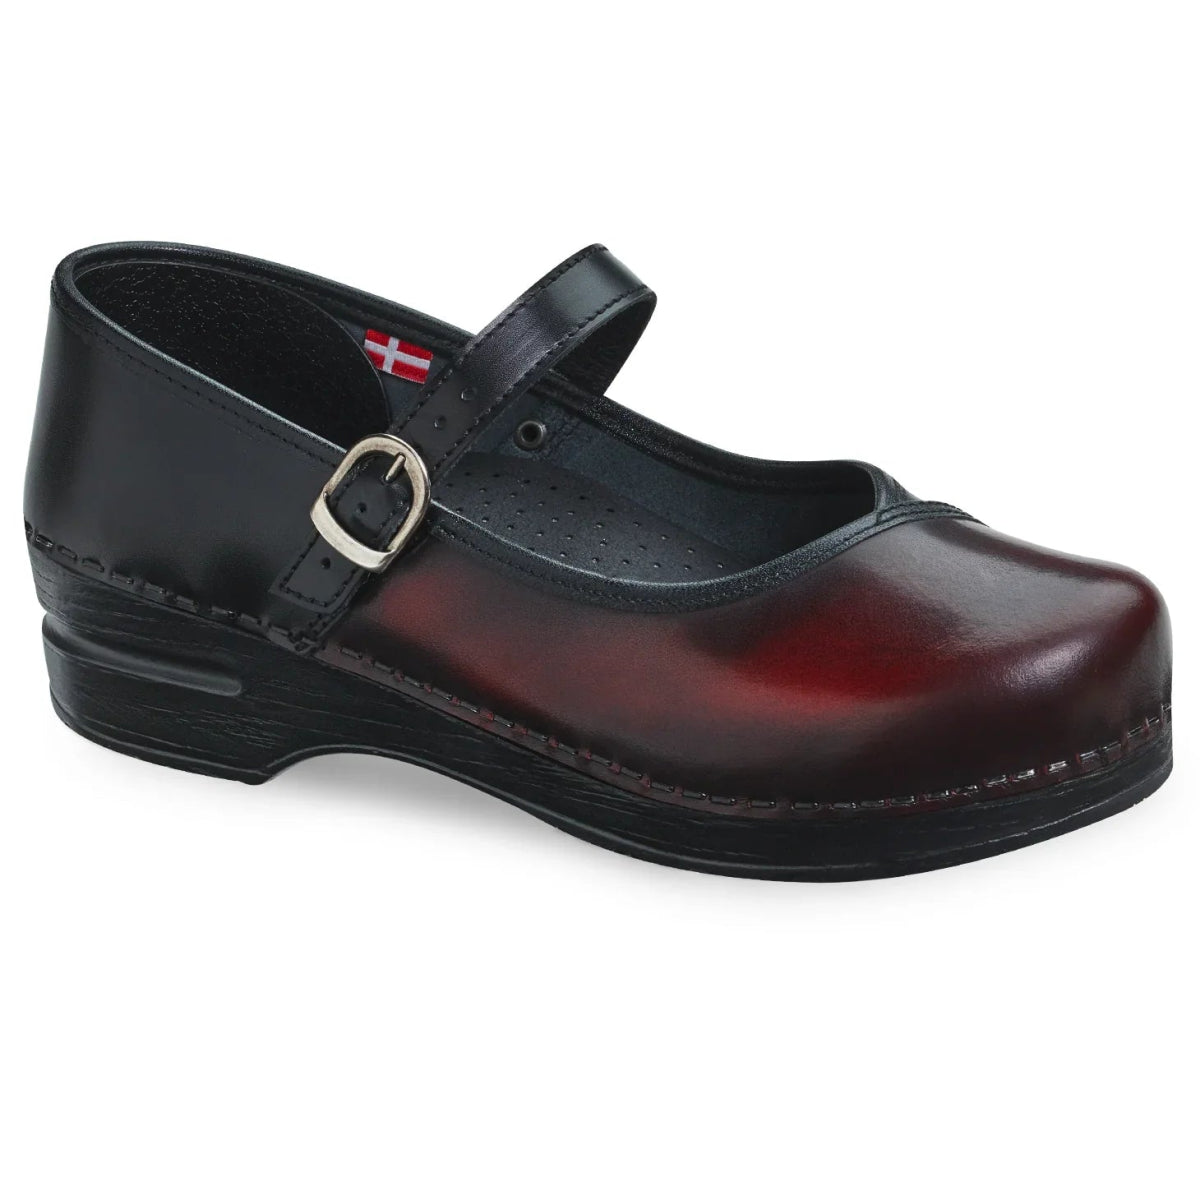 SANITA EVERLY WOMEN CLOG IN BLACK/BORDEAUX - TLW Shoes